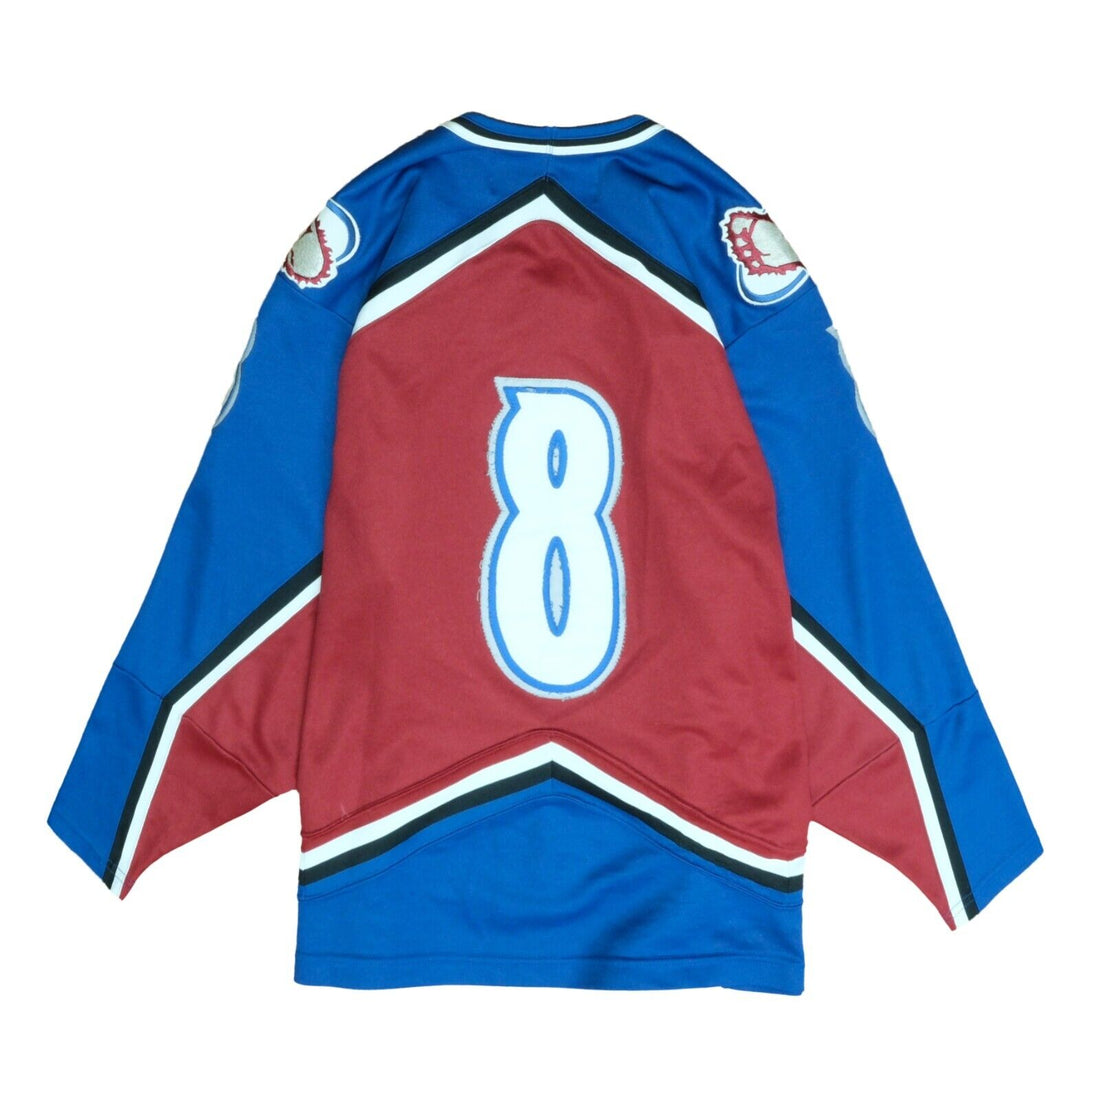 1995-1996 Colorado Avalanche Jersey Reference